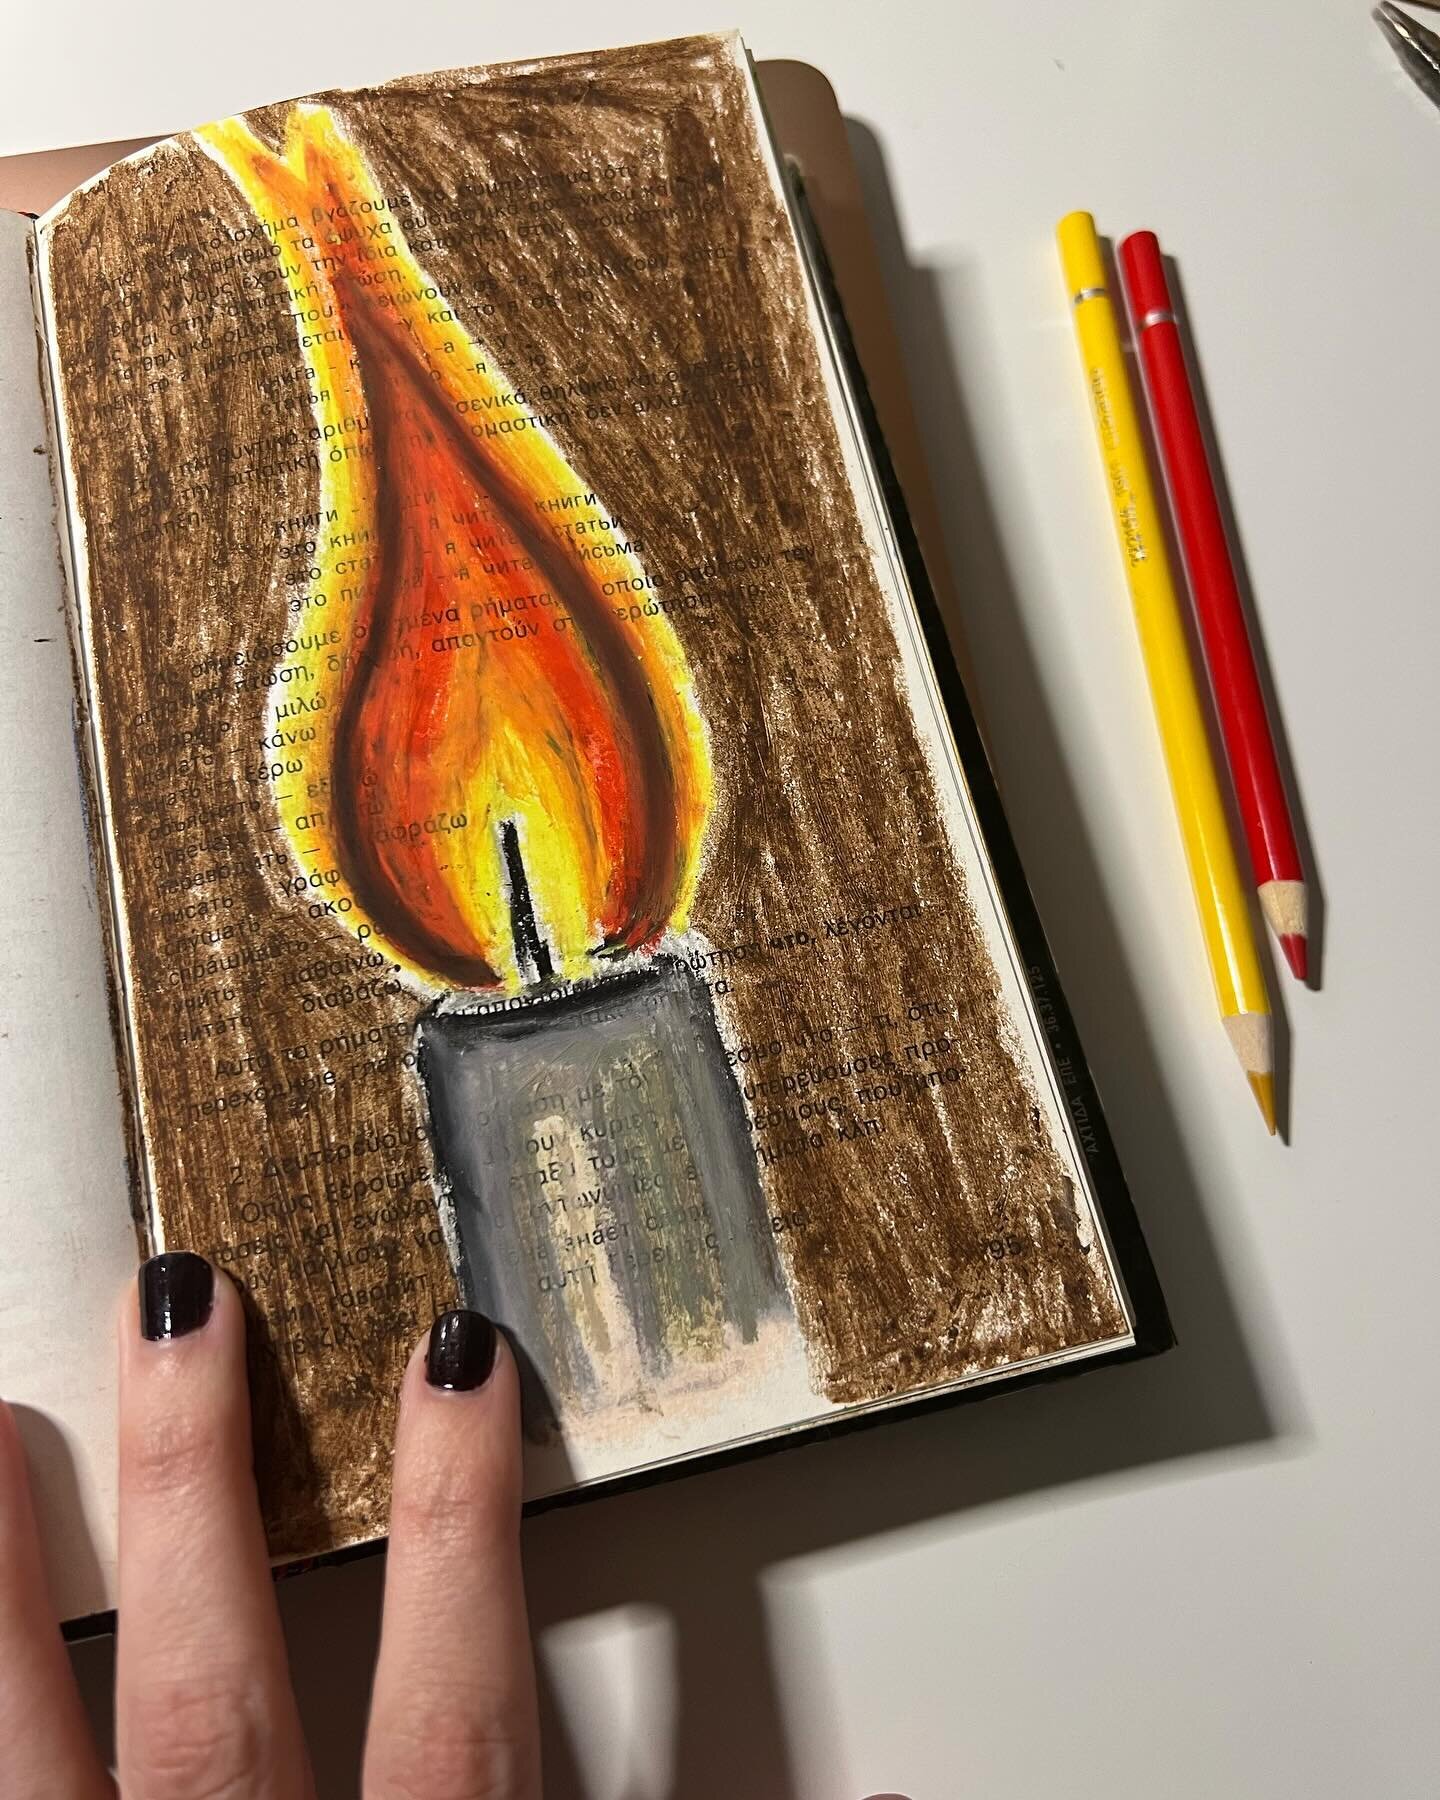 Why is lighting a candle so soothing? #sketchbook #oilpastel #candle #artpractice